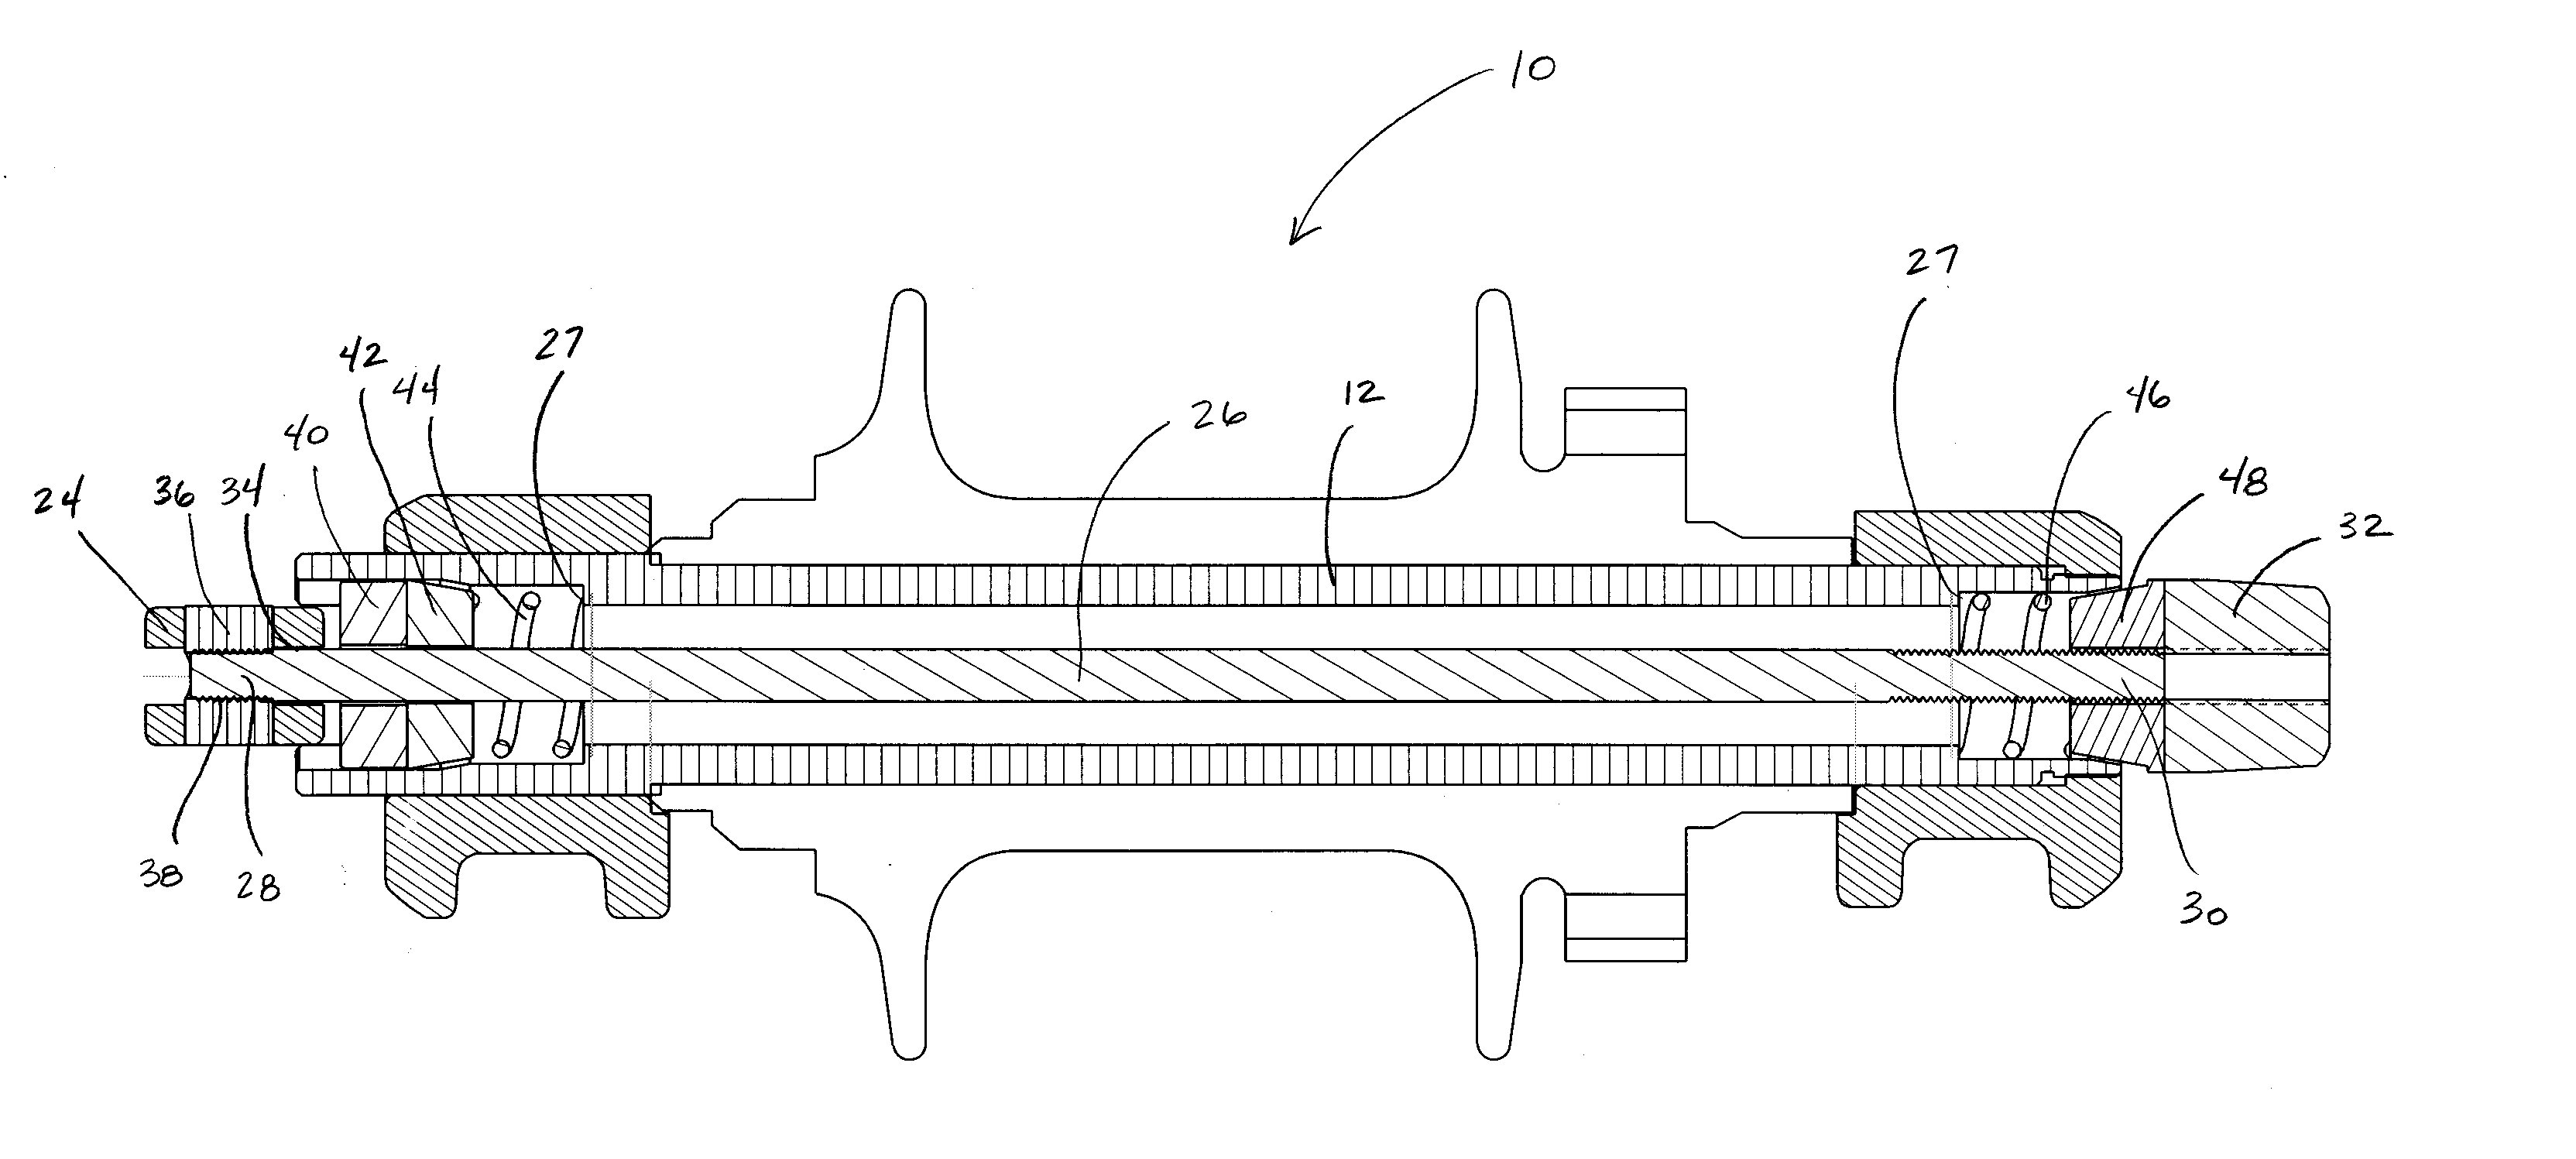 Axle assembly for mounting a wheel to a vehicle